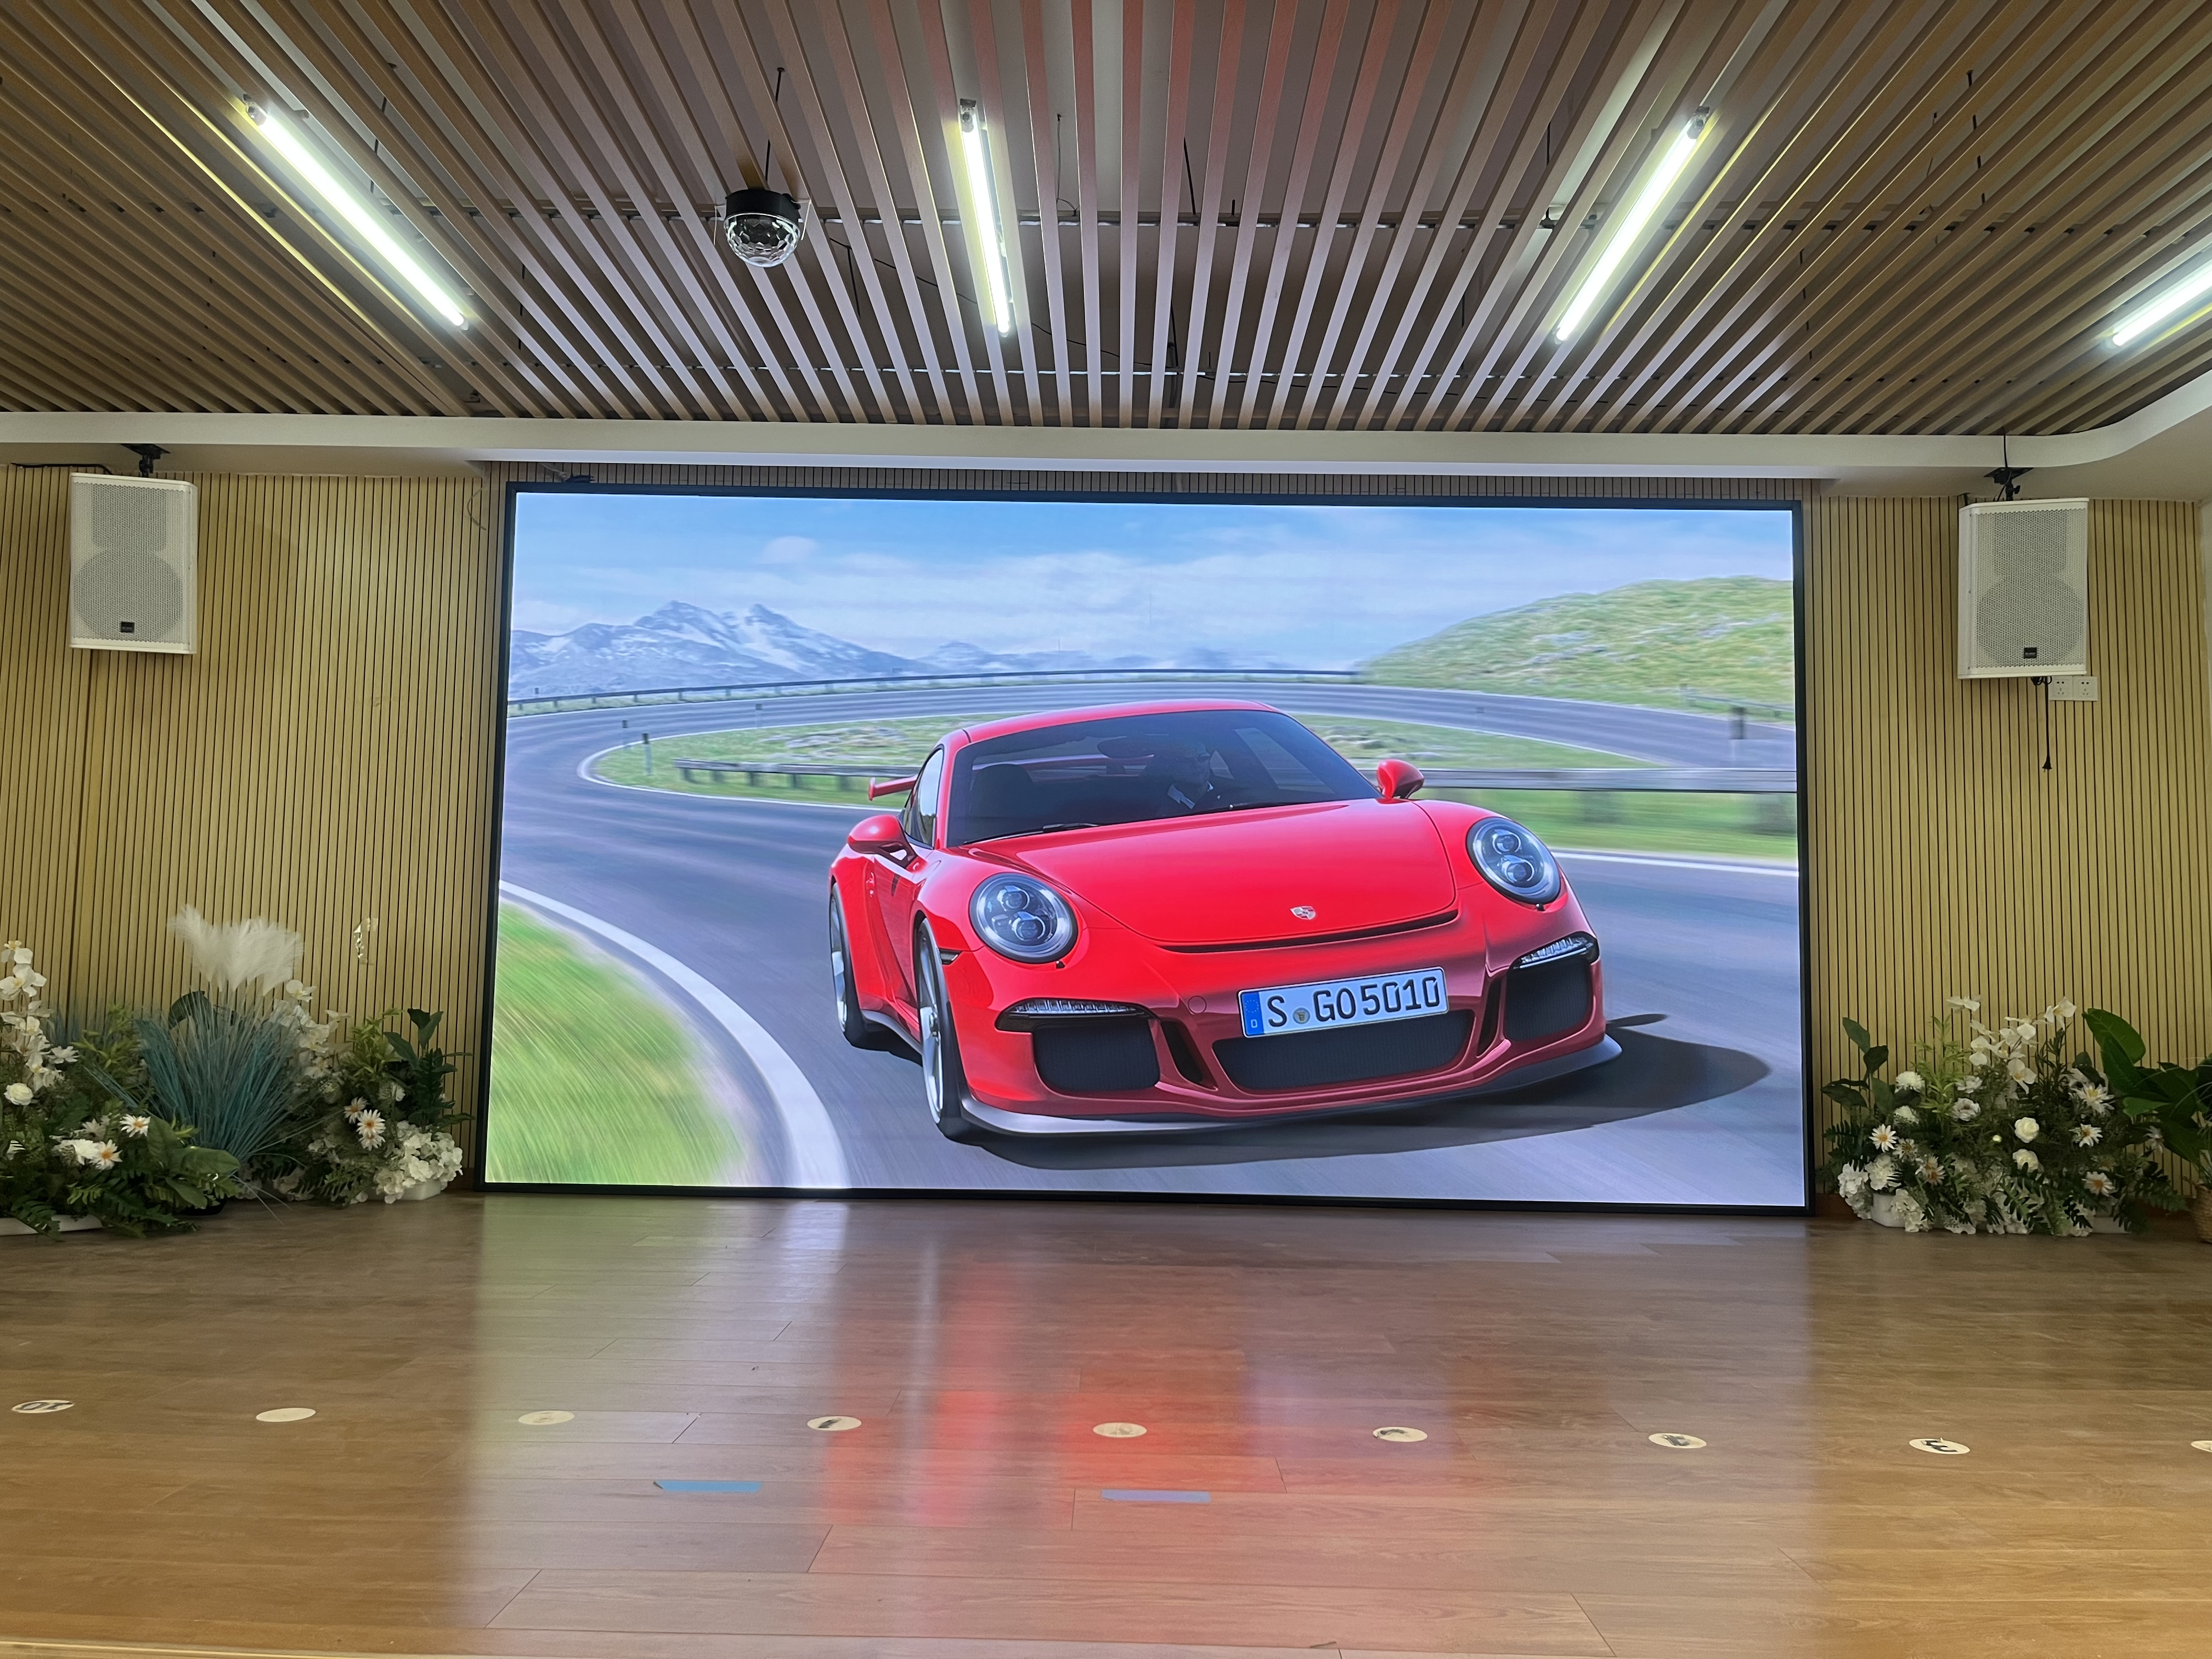 P1.53 indoor full color led display screen for conference rooms